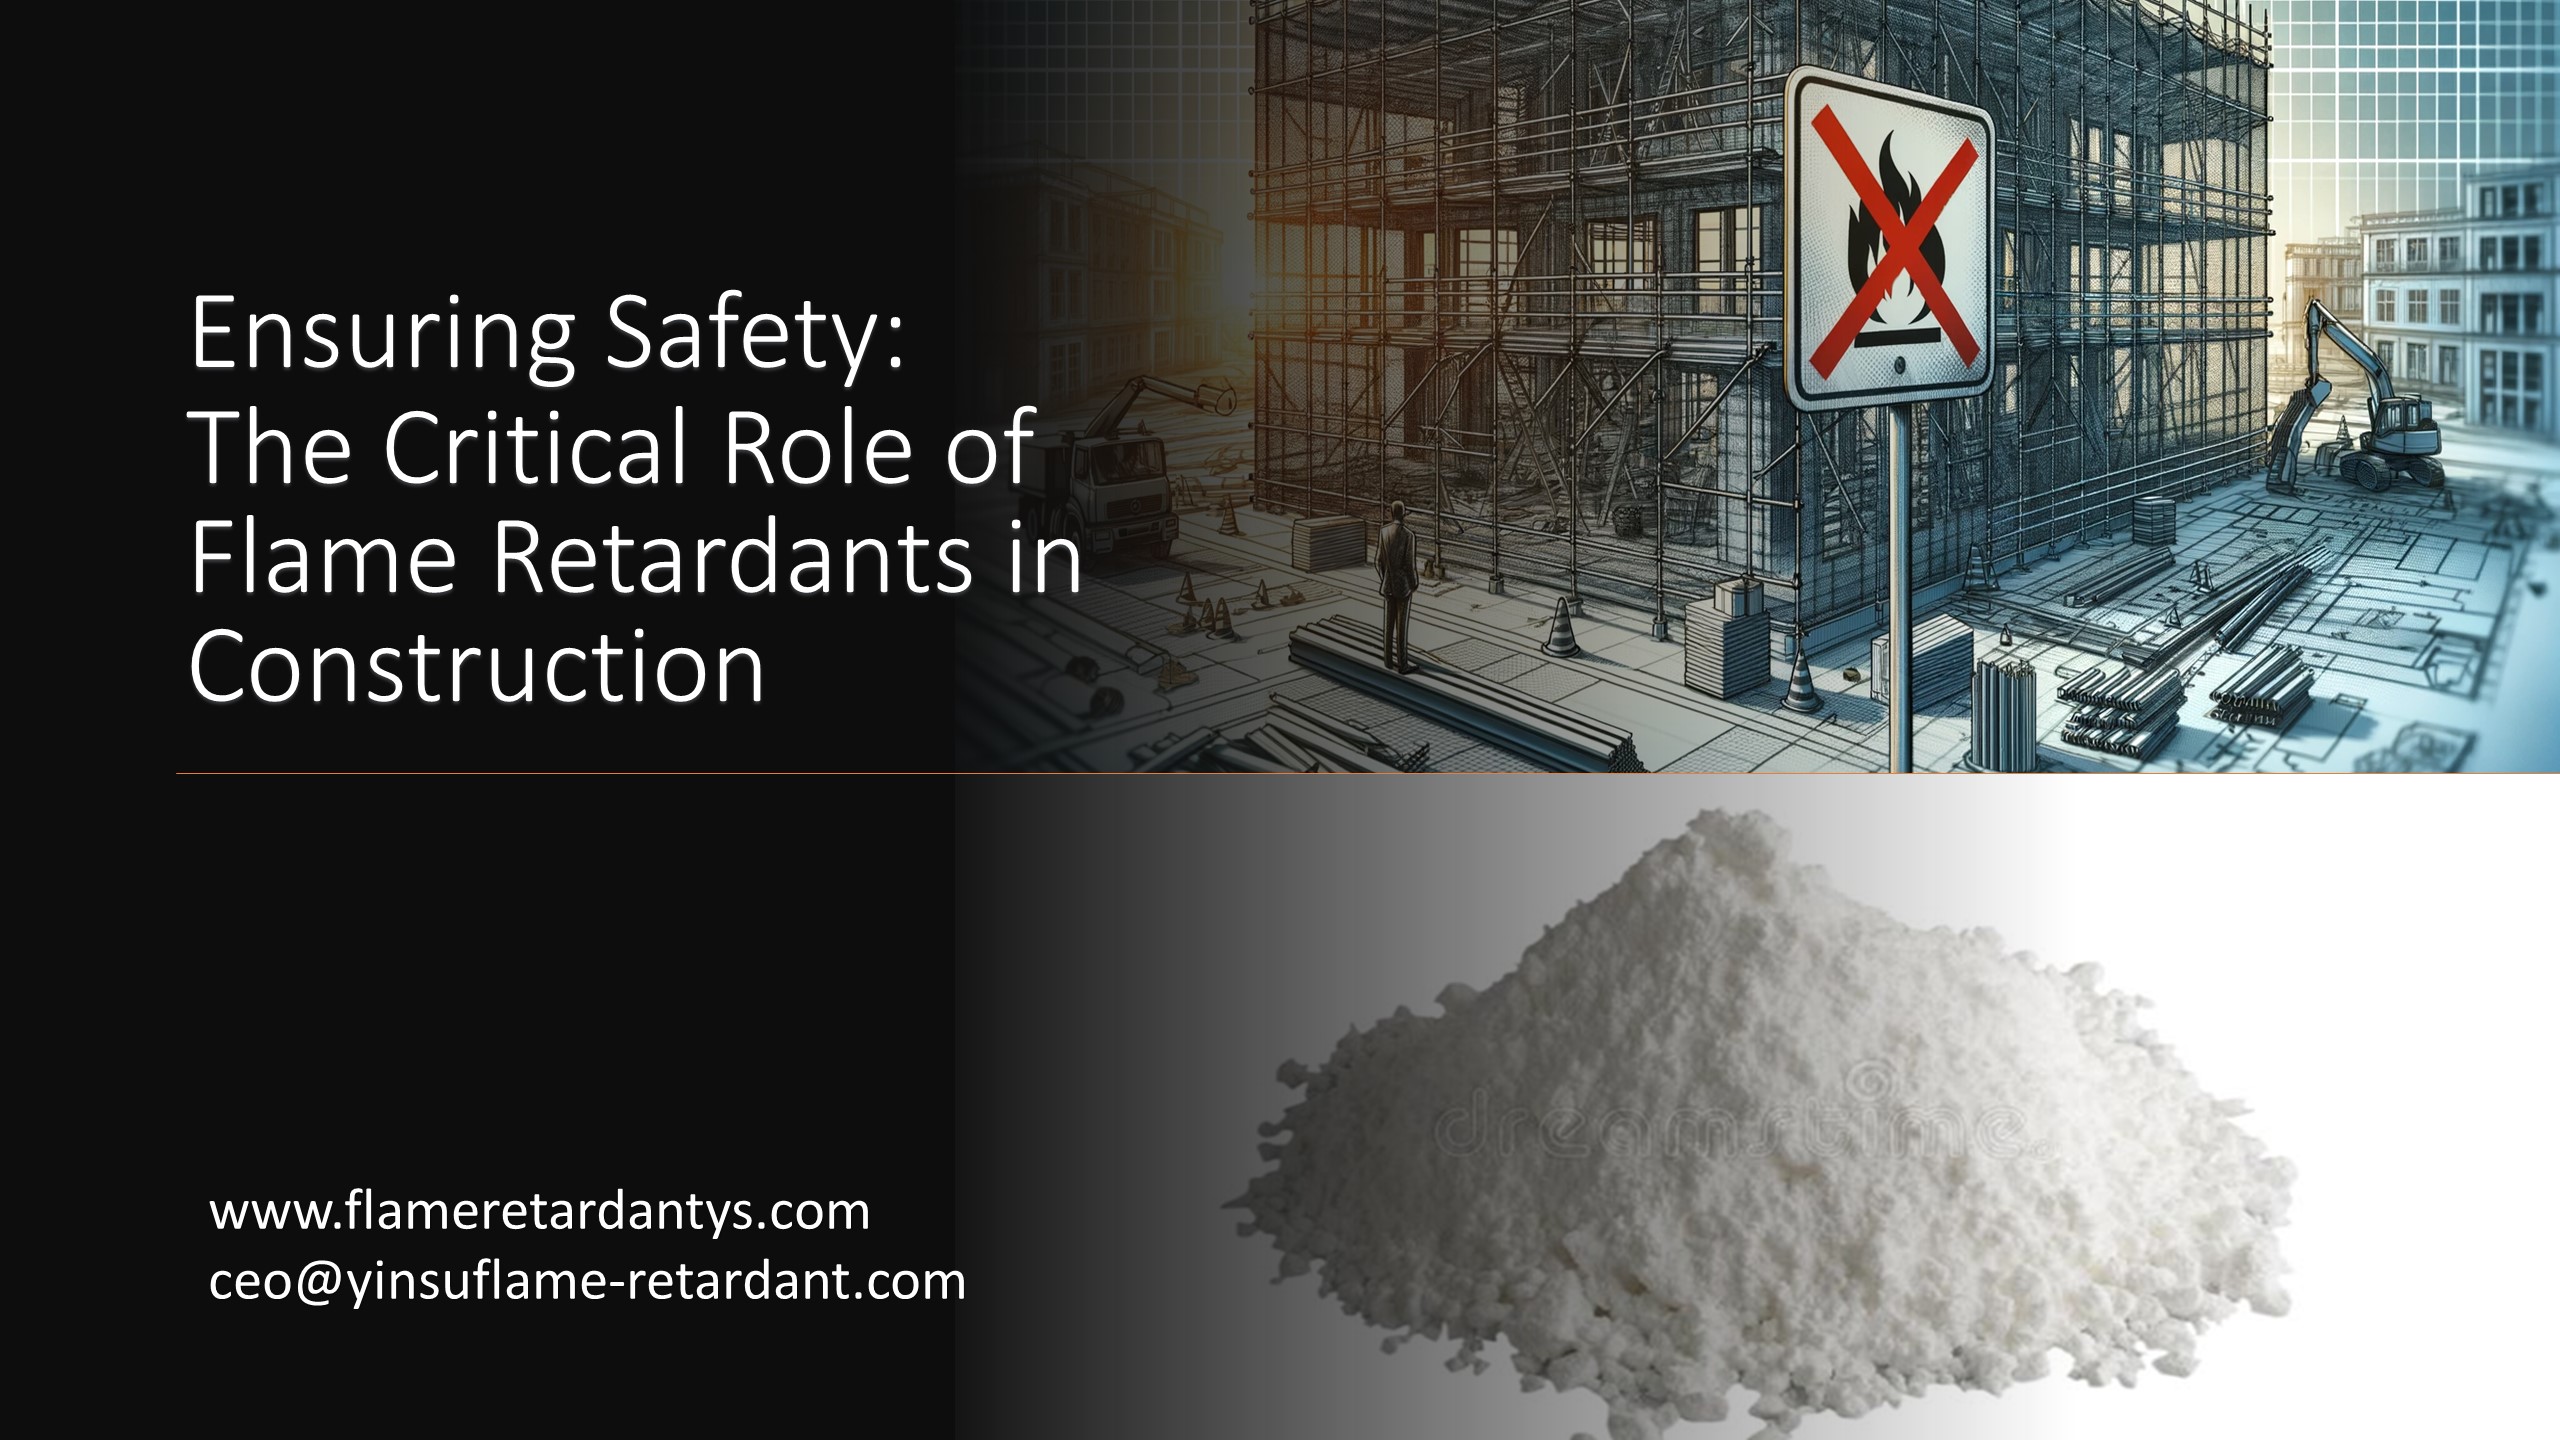 Ensuring Safety: The Critical Role of Flame Retardants in Construction